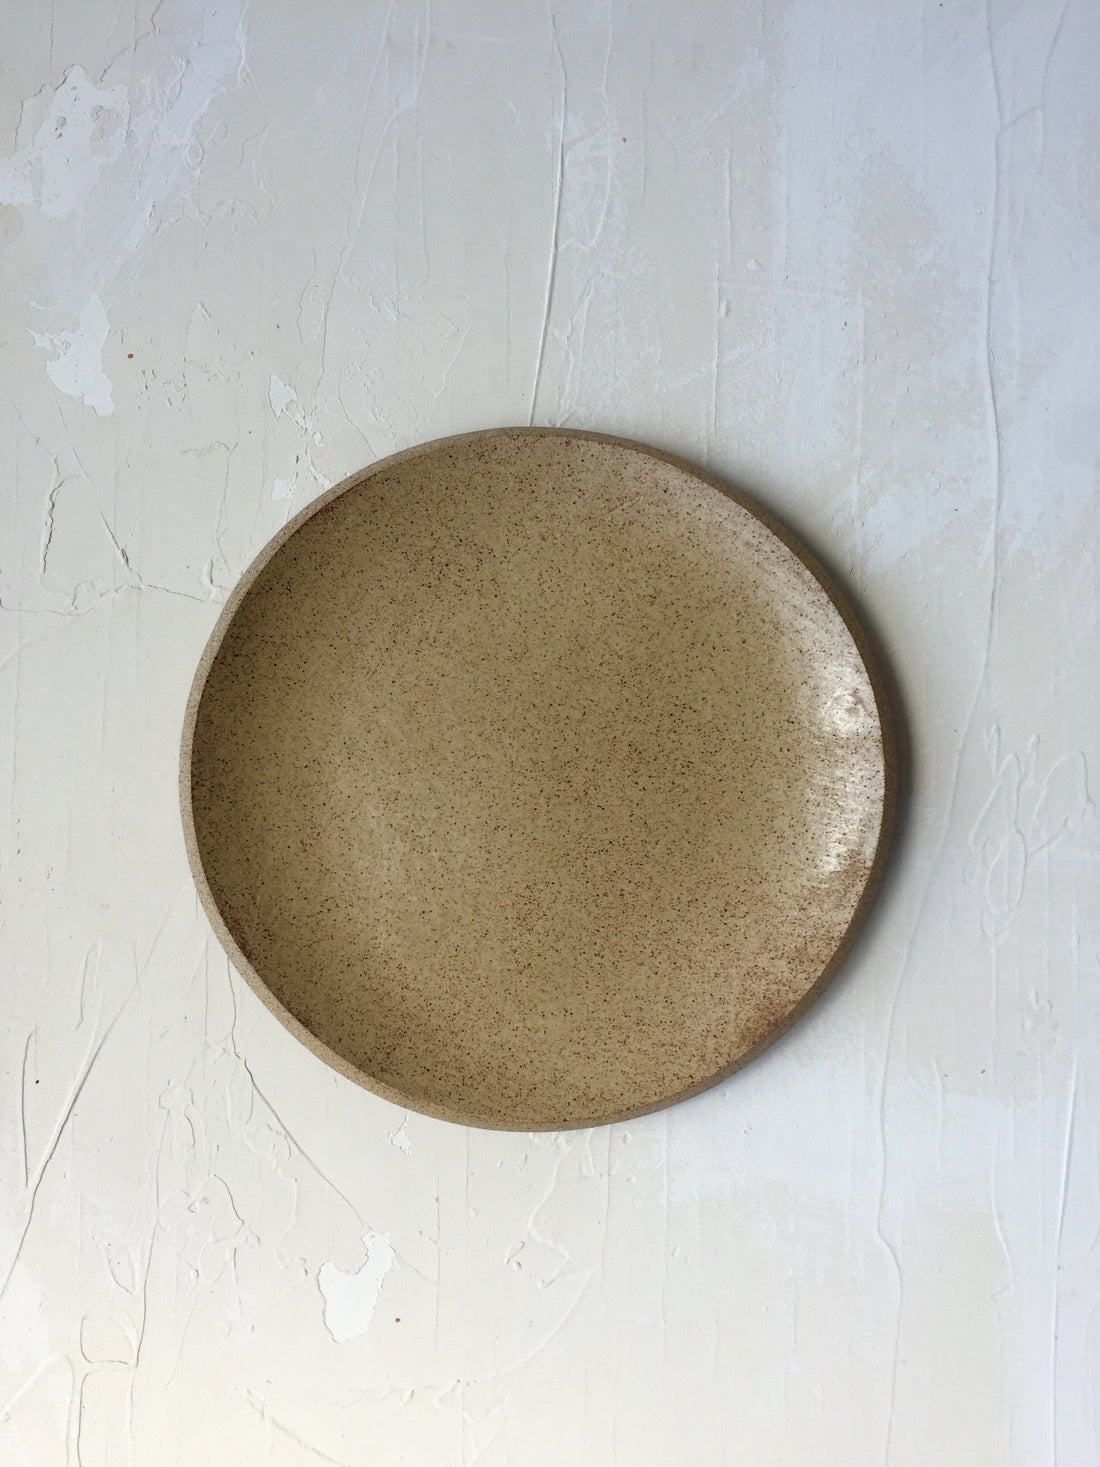 8.5 inch Orb Plate in Sand